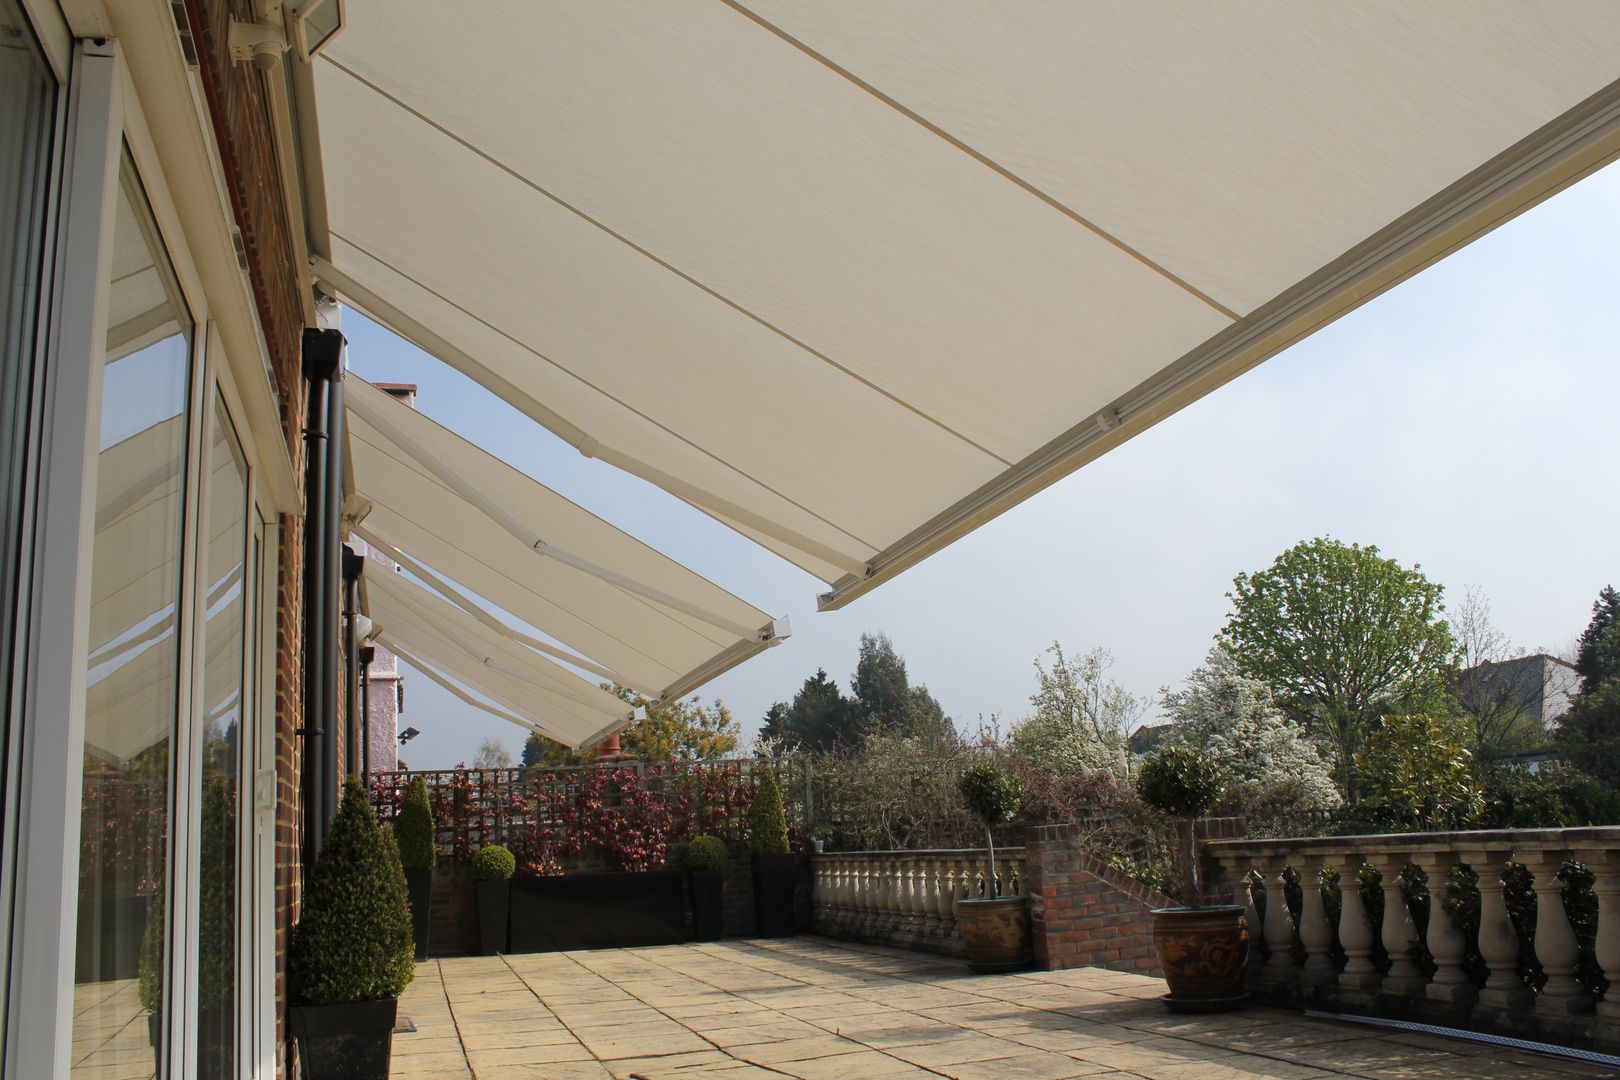 Patio Awning Installation in London. homify ระเบียง, นอกชาน patio,awning,terrace,canopy,garden,alfresco,shading